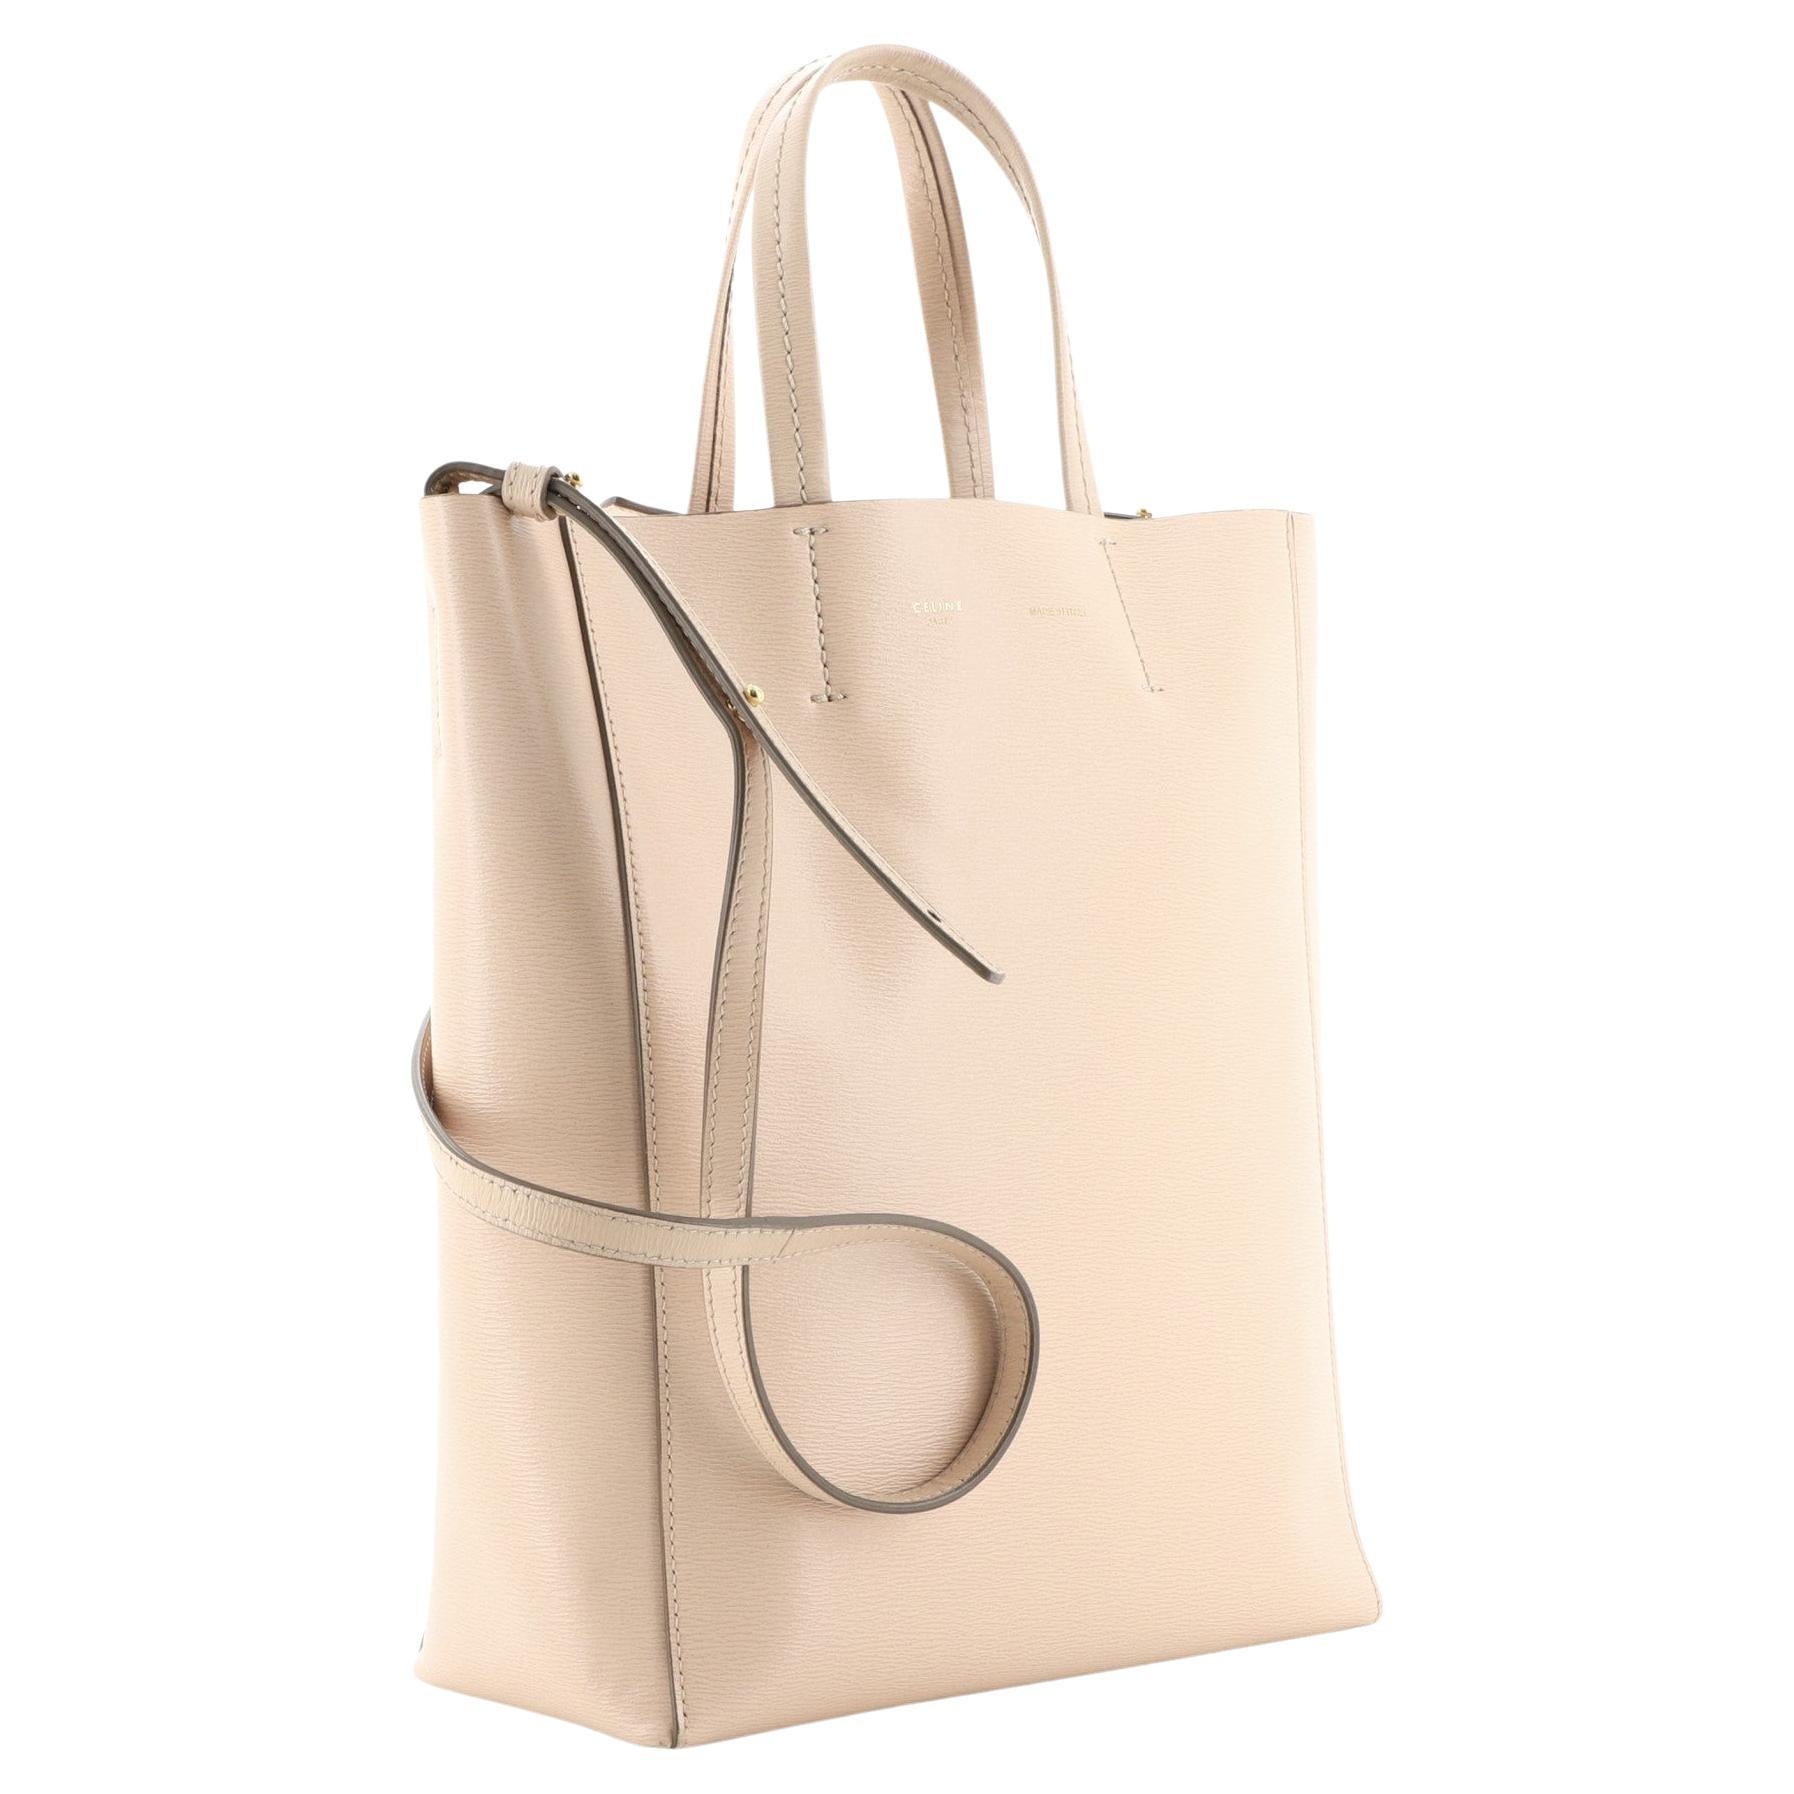 Celine Small Vertical Cabas Tote With Celine Print Natural/Tan